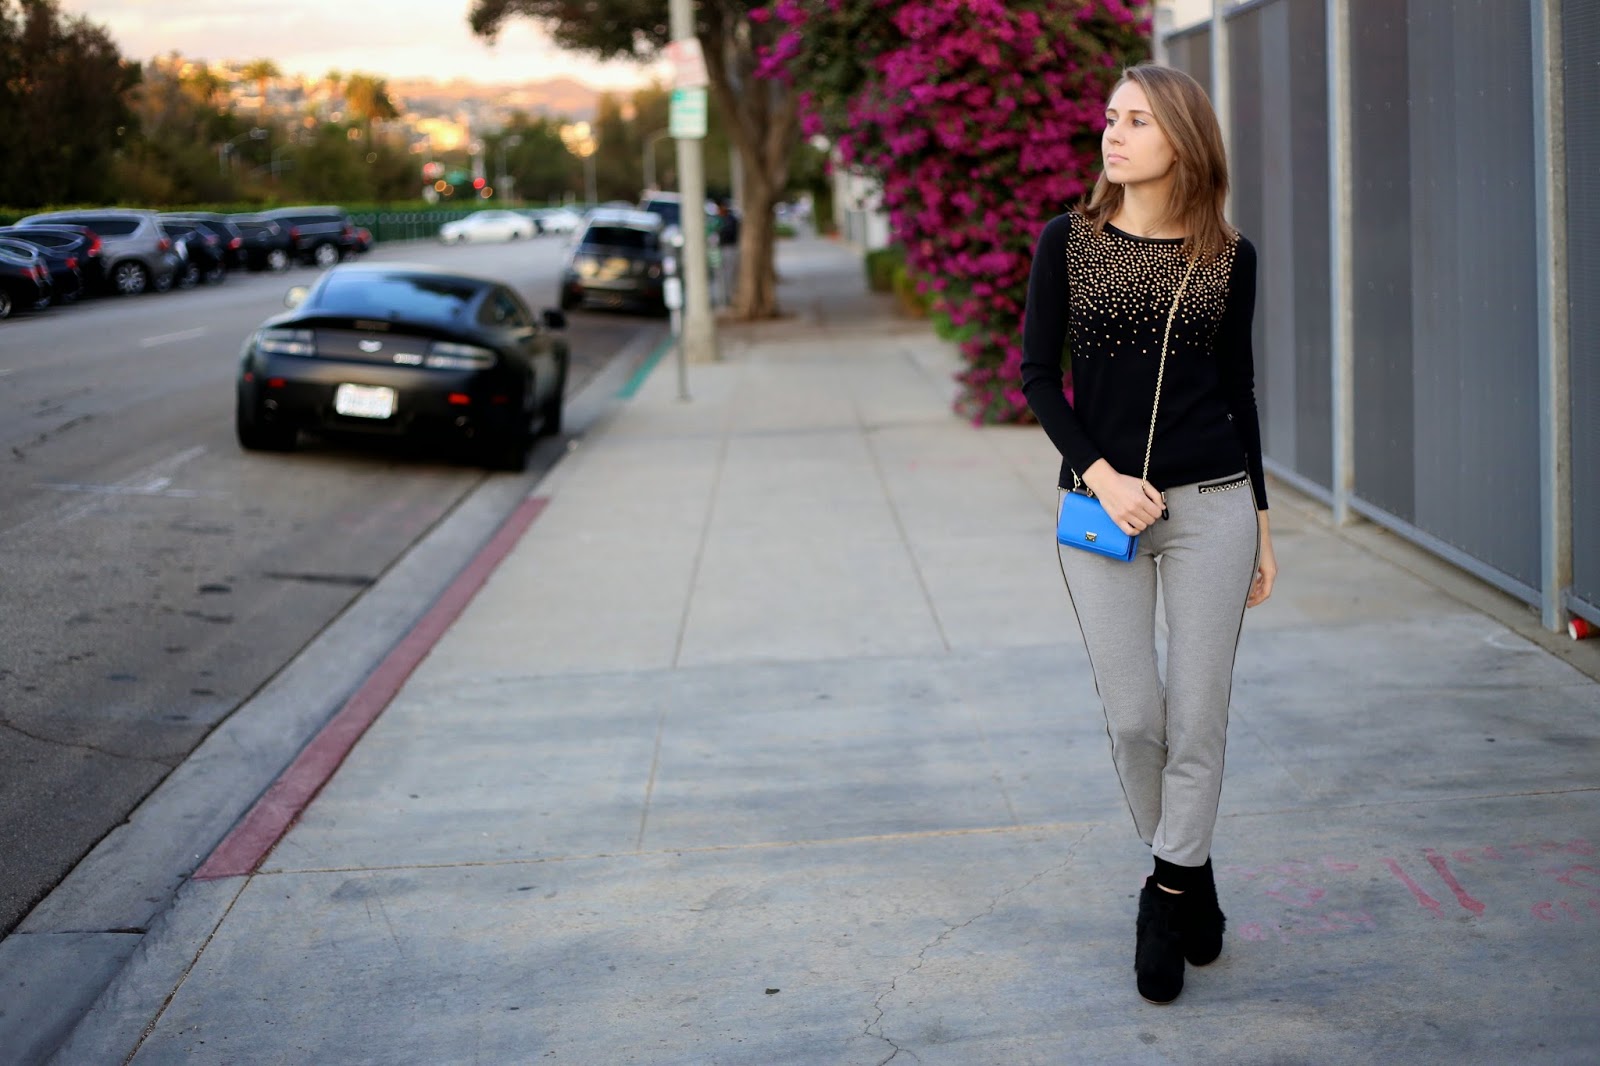 LA by Diana - Personal Style blog by Diana Marks: Blogger Style